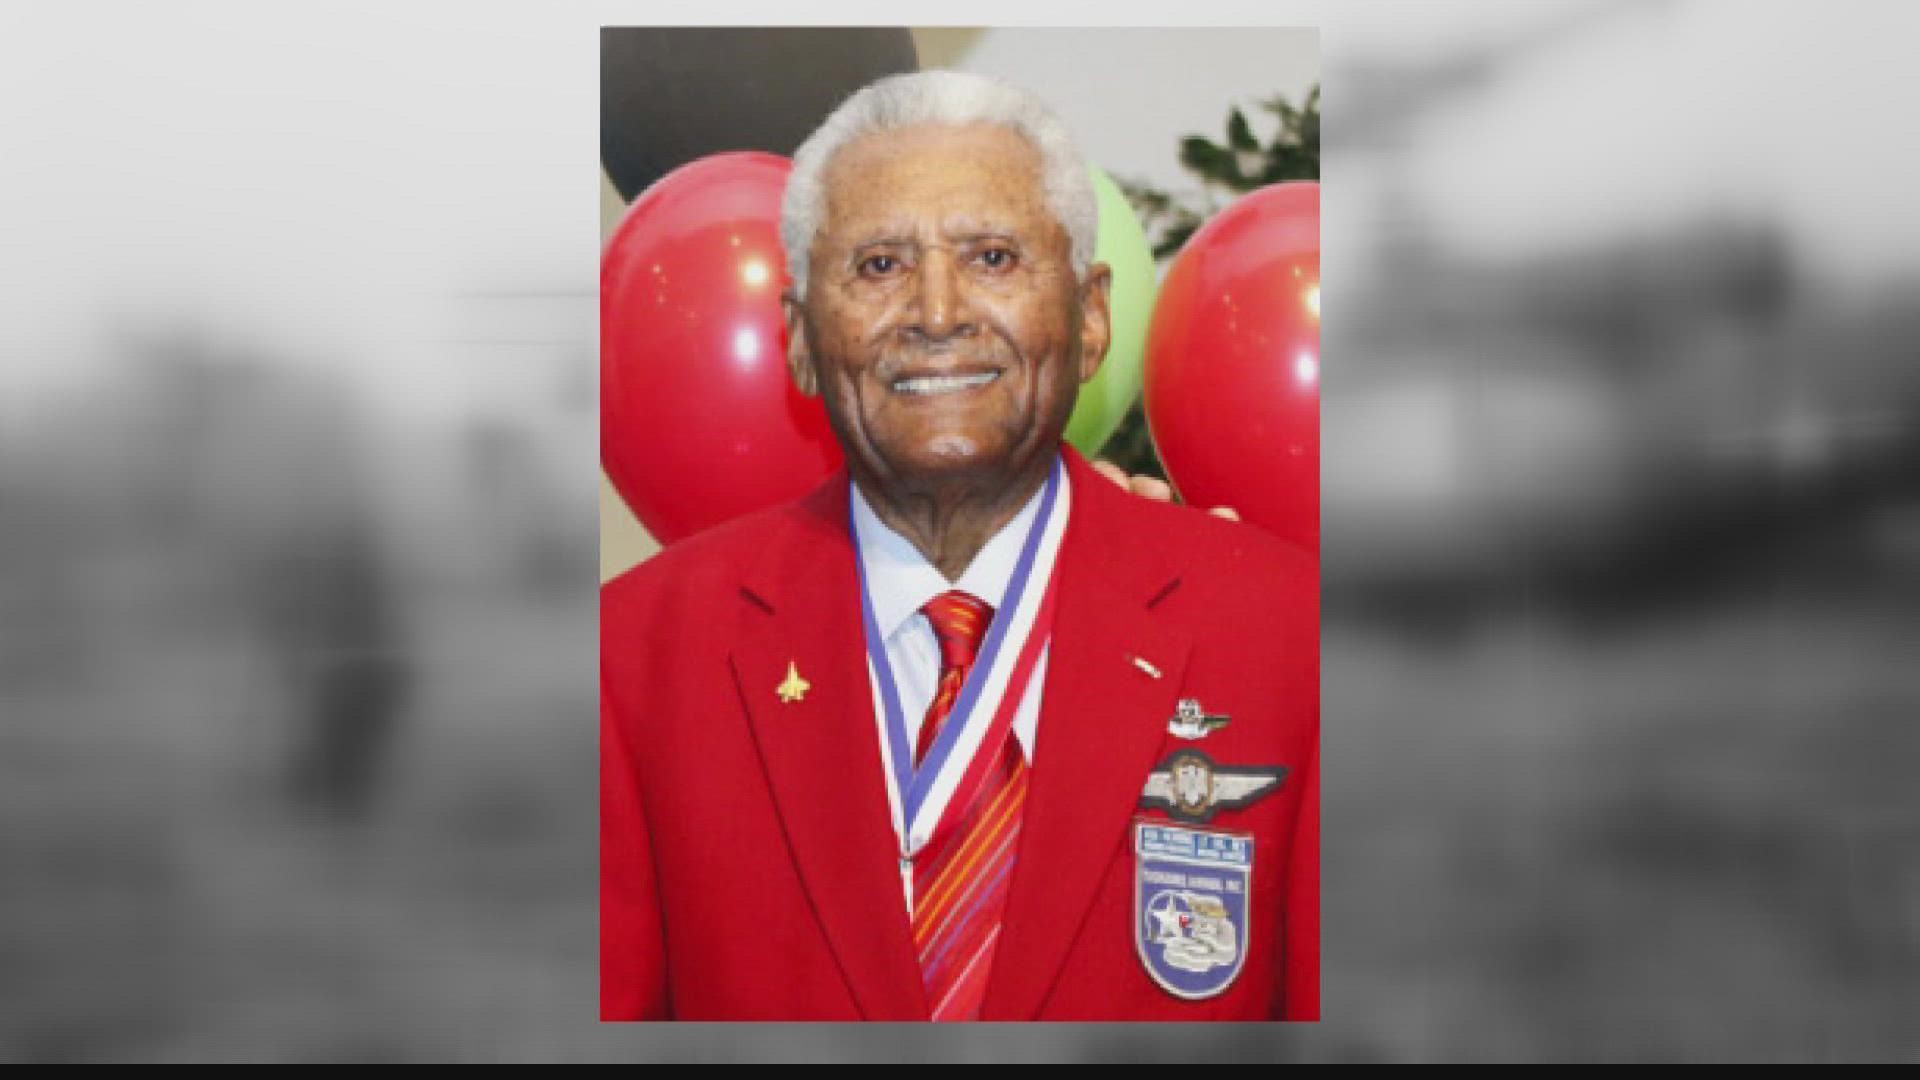 One of the last original members of the Tuskegee Airmen has passed away. Retired Lieutenant Colonel Asa D. Herring was 95 years old.